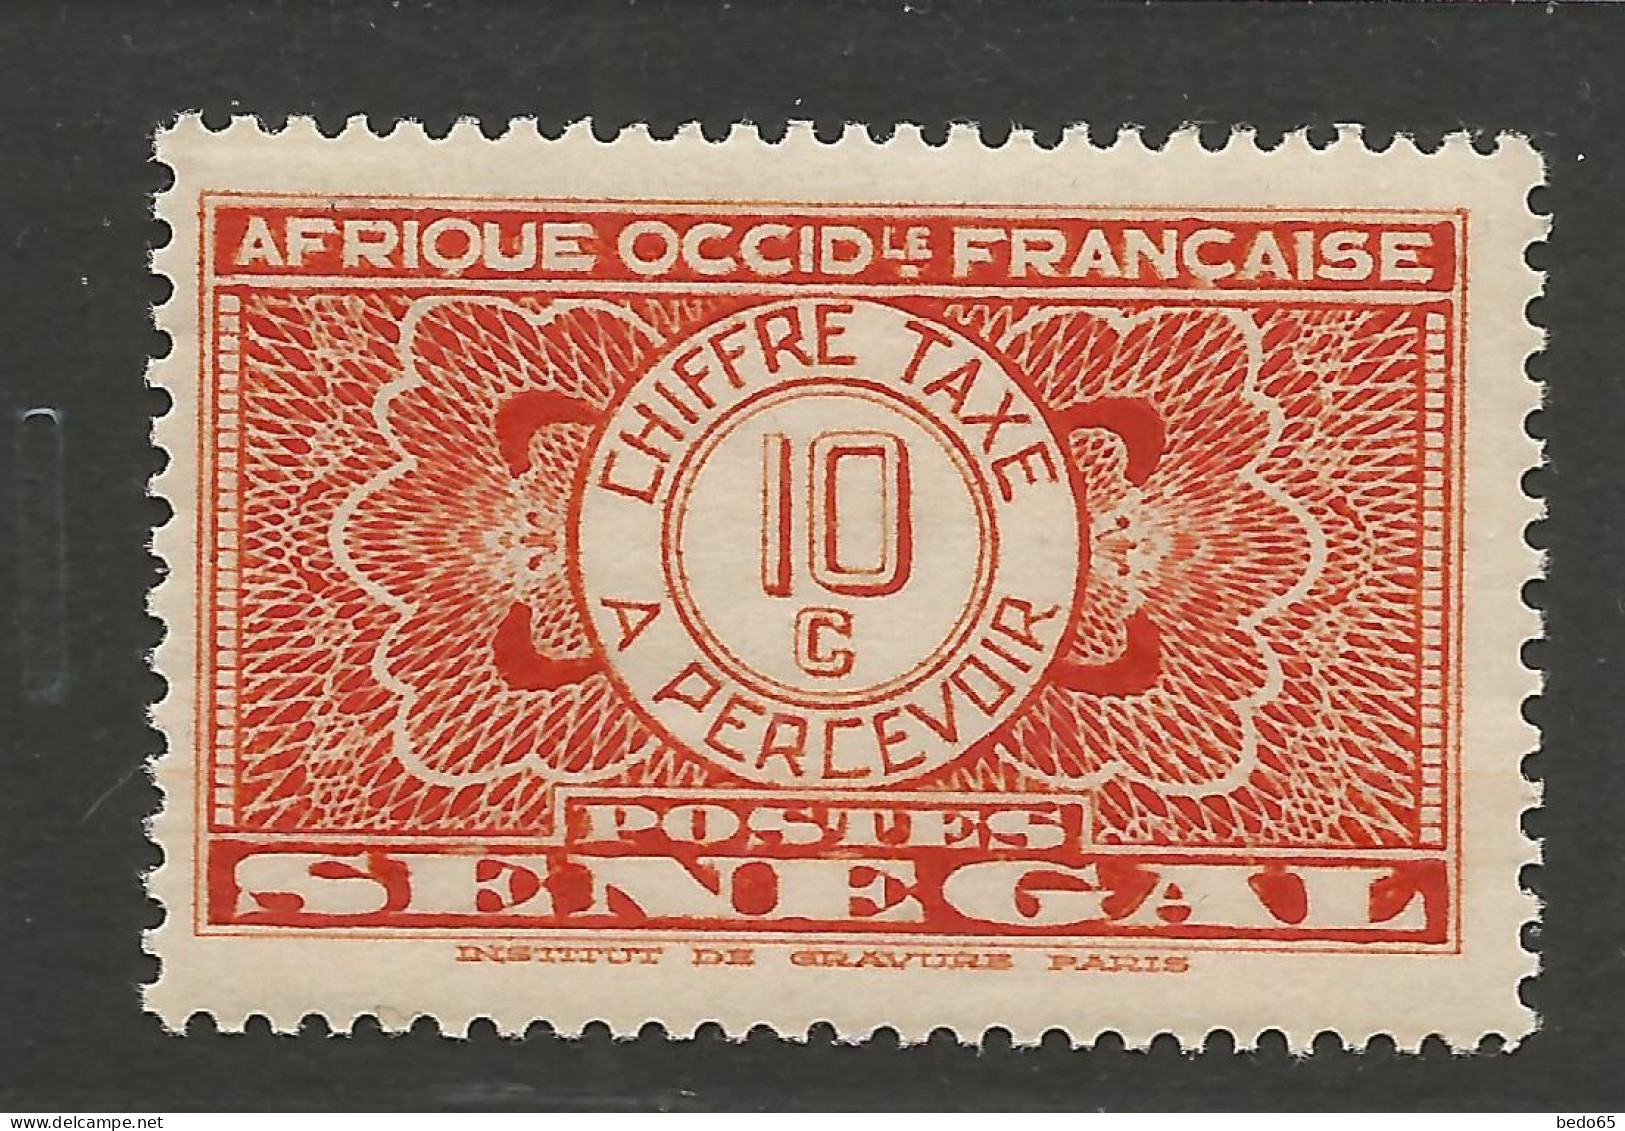 SENEGAL TA N° 23 NEUF** LUXE SANS CHARNIERE / Hingeless / MNH - Postage Due